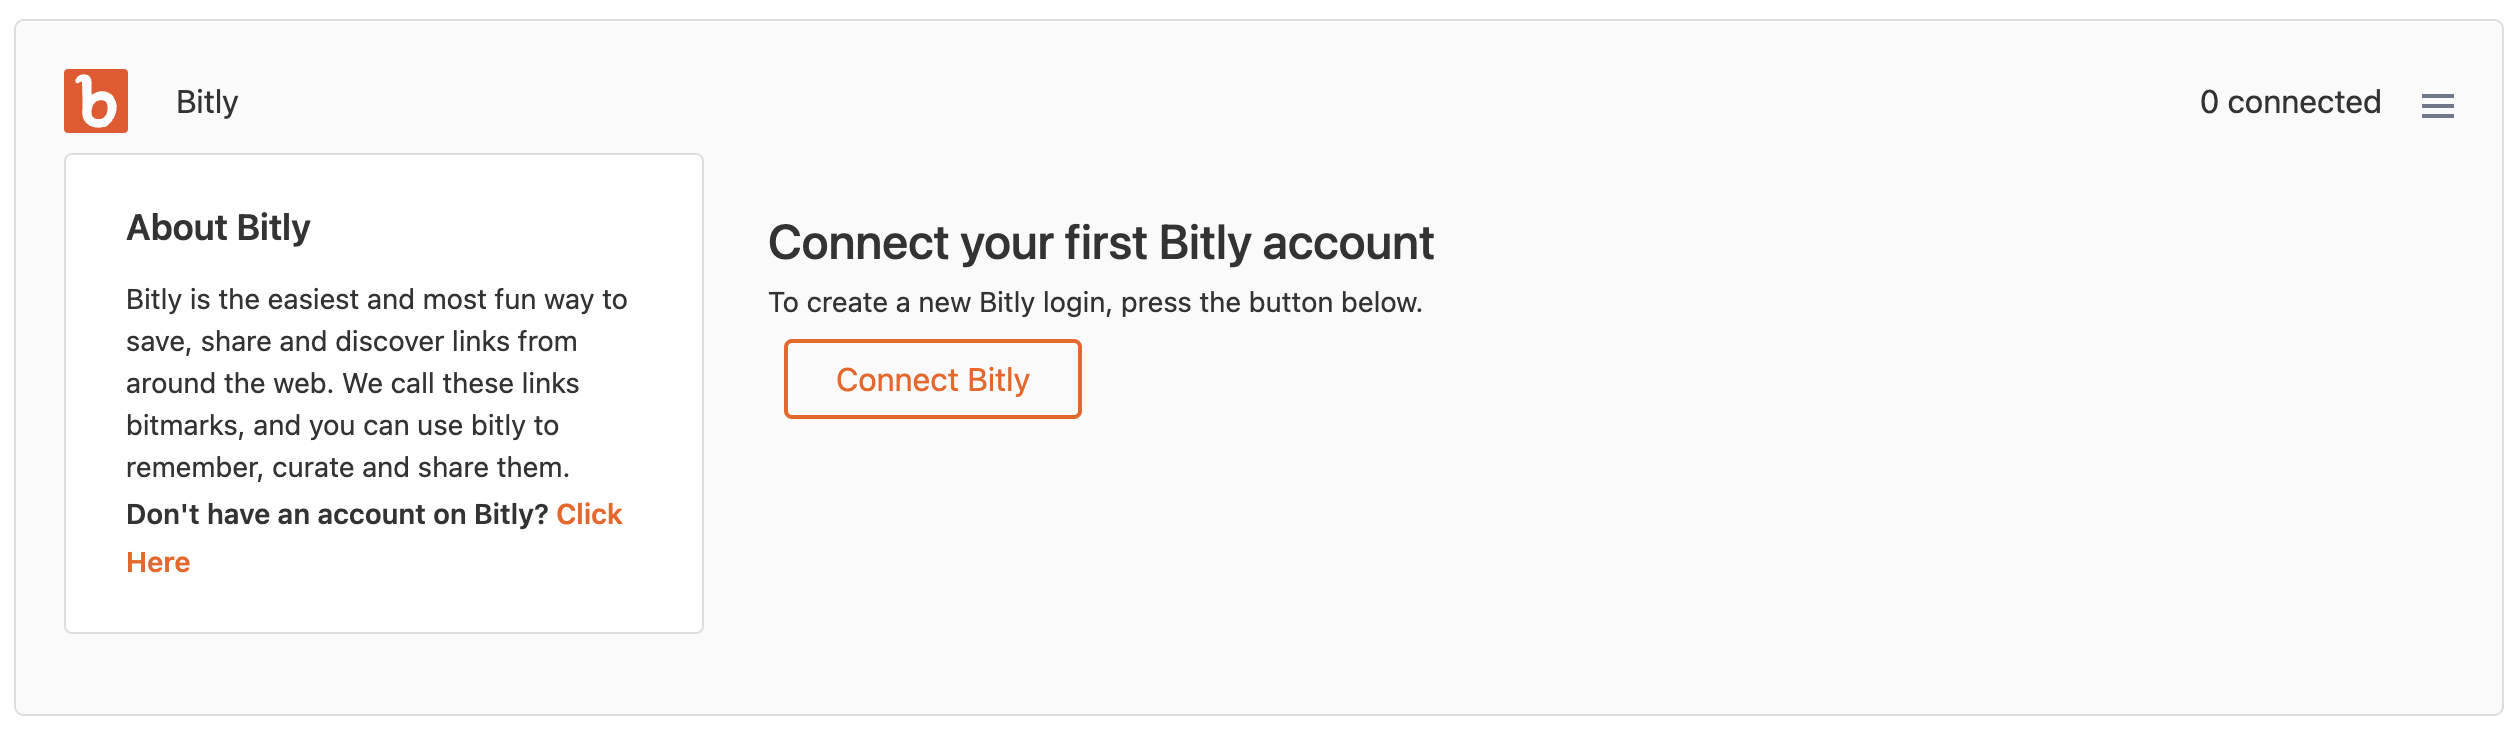 Bitly_OnlyWire_3.png